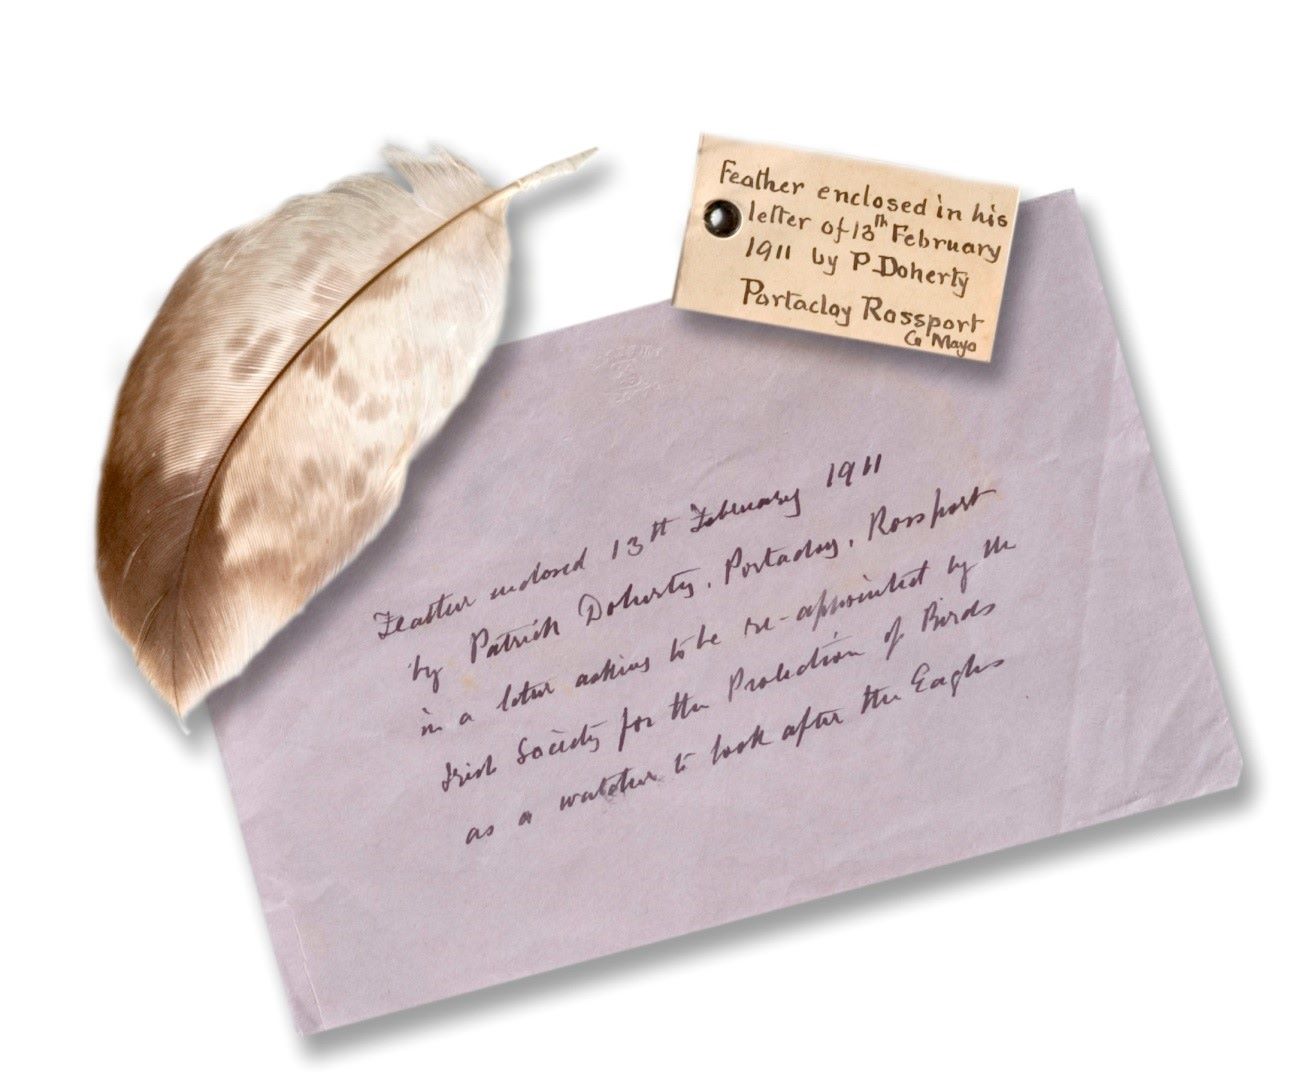 Collage composed of a golden eagle feather with a handwritten label attached and an addressed lavender-coloured envelope.